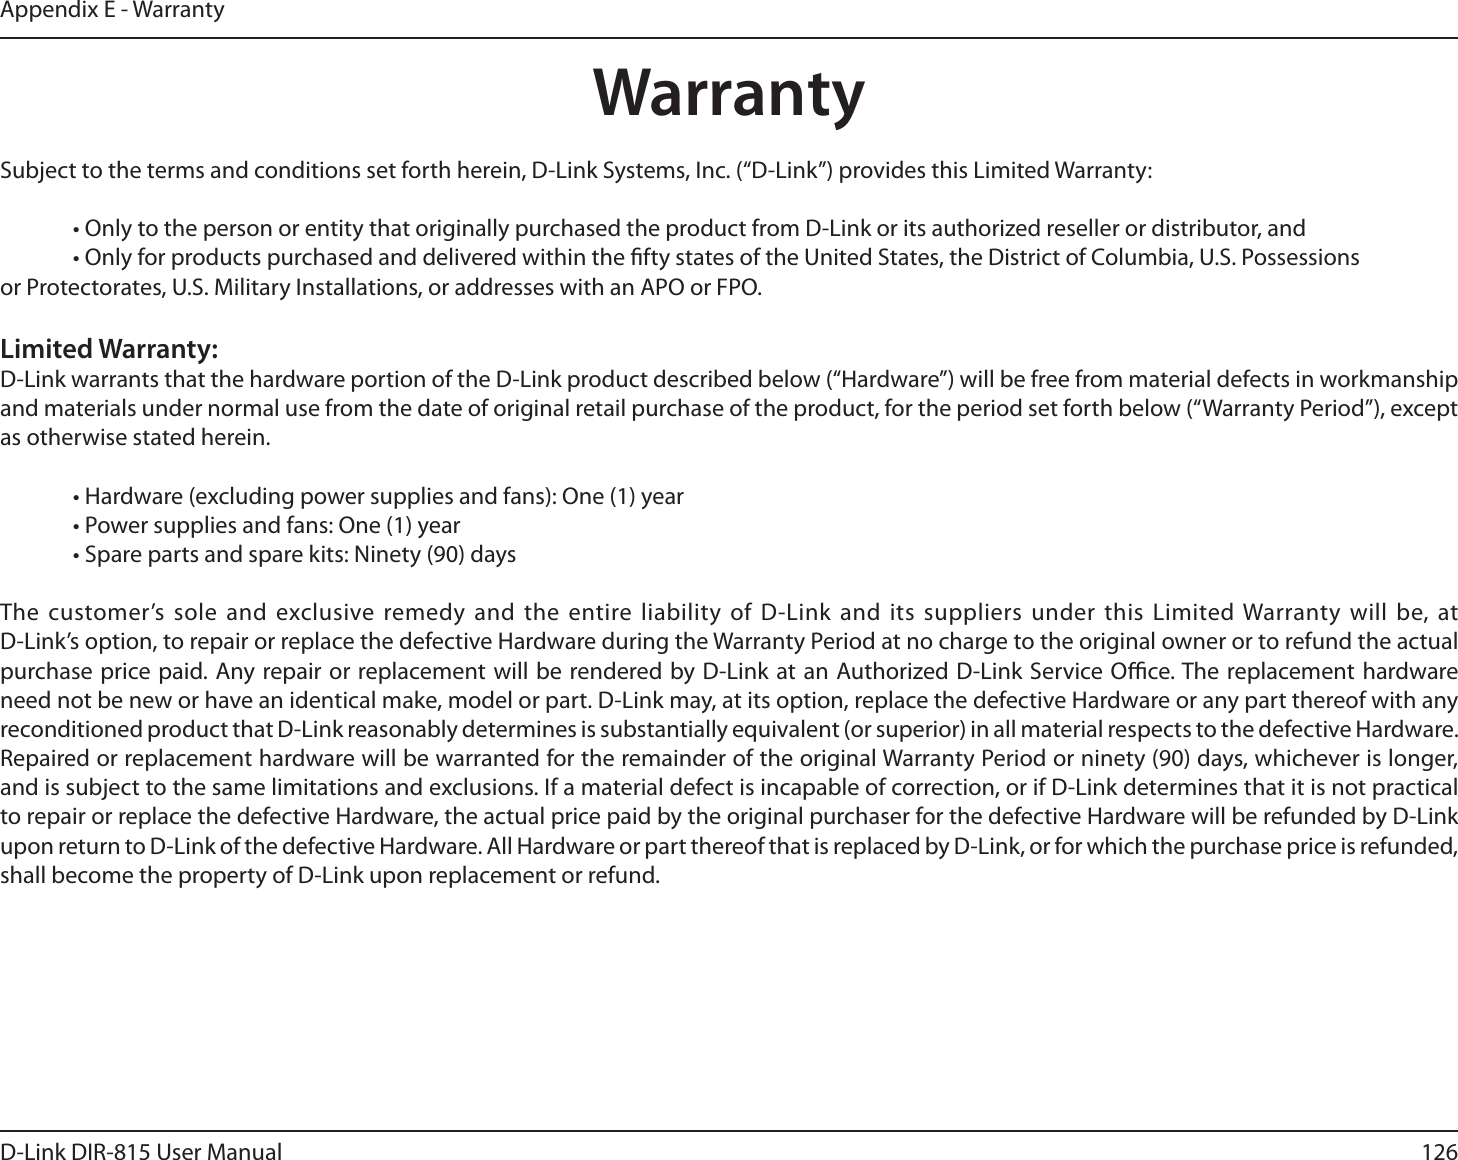 126D-Link DIR-815 User ManualAppendix E - WarrantyWarrantySubject to the terms and conditions set forth herein, D-Link Systems, Inc. (“D-Link”) provides this Limited Warranty: t0OMZUPUIFQFSTPOPSFOUJUZUIBUPSJHJOBMMZQVSDIBTFEUIFQSPEVDUGSPN%-JOLPSJUTBVUIPSJ[FESFTFMMFSPSEJTUSJCVUPSBOE t0OMZGPSQSPEVDUTQVSDIBTFEBOEEFMJWFSFEXJUIJOUIFöGUZTUBUFTPGUIF6OJUFE4UBUFTUIF%JTUSJDUPG$PMVNCJB641PTTFTTJPOT  or Protectorates, U.S. Military Installations, or addresses with an APO or FPO.Limited Warranty:D-Link warrants that the hardware portion of the D-Link product described below (“Hardware”) will be free from material defects in workmanship and materials under normal use from the date of original retail purchase of the product, for the period set forth below (“Warranty Period”), except as otherwise stated herein. t)BSEXBSFFYDMVEJOHQPXFSTVQQMJFTBOEGBOT0OFZFBS t1PXFSTVQQMJFTBOEGBOT0OFZFBS t4QBSFQBSUTBOETQBSFLJUT/JOFUZEBZTThe customer’s sole and exclusive remedy and the entire liability of D-Link and its suppliers under this Limited Warranty will be, at  D-Link’s option, to repair or replace the defective Hardware during the Warranty Period at no charge to the original owner or to refund the actual purchase price paid. Any repair or replacement will be rendered by D-Link at an Authorized D-Link Service Oce. The replacement hardware need not be new or have an identical make, model or part. D-Link may, at its option, replace the defective Hardware or any part thereof with any reconditioned product that D-Link reasonably determines is substantially equivalent (or superior) in all material respects to the defective Hardware. Repaired or replacement hardware will be warranted for the remainder of the original Warranty Period or ninety (90) days, whichever is longer, and is subject to the same limitations and exclusions. If a material defect is incapable of correction, or if D-Link determines that it is not practical to repair or replace the defective Hardware, the actual price paid by the original purchaser for the defective Hardware will be refunded by D-Link upon return to D-Link of the defective Hardware. All Hardware or part thereof that is replaced by D-Link, or for which the purchase price is refunded, shall become the property of D-Link upon replacement or refund.